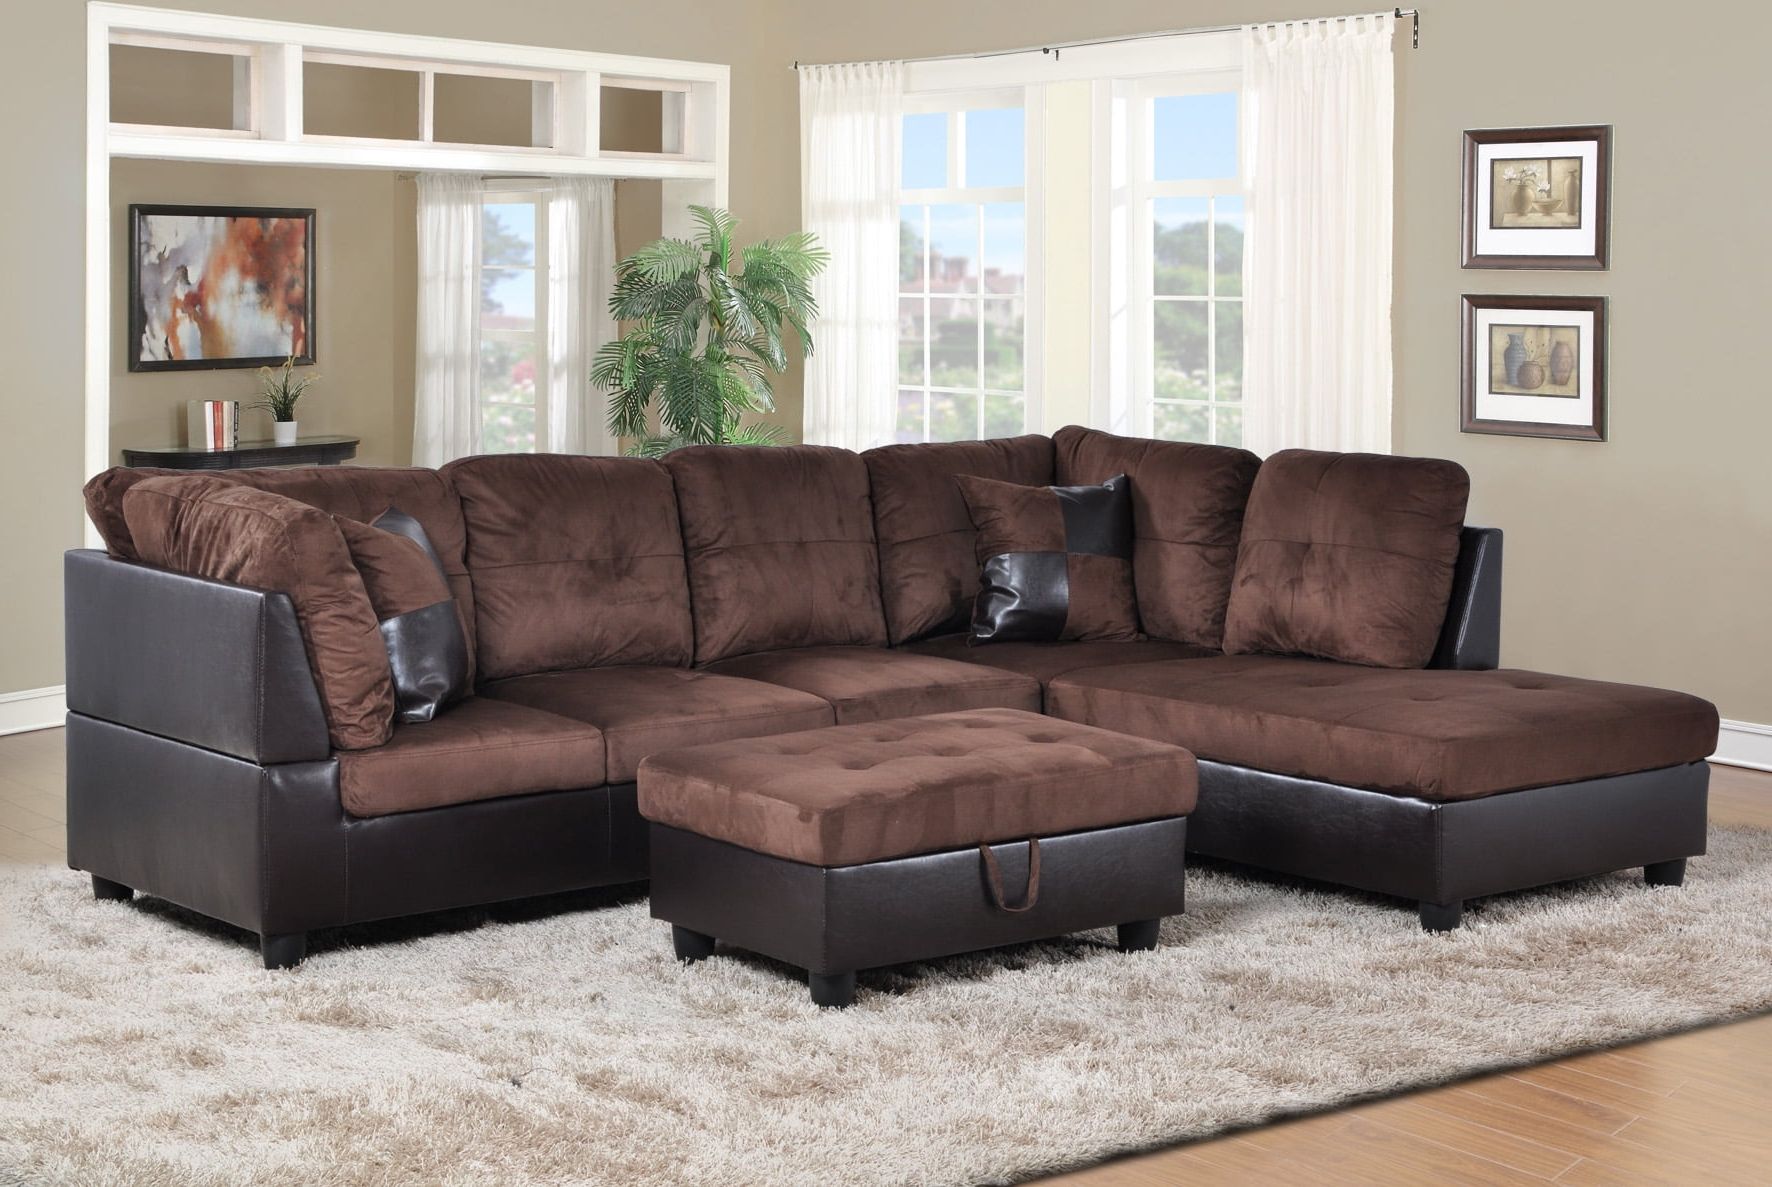 Ponliving Furniture Hermann Left Chaise Sectional Sofa With Storage For Faux Leather Sofas In Chocolate Brown (View 13 of 20)